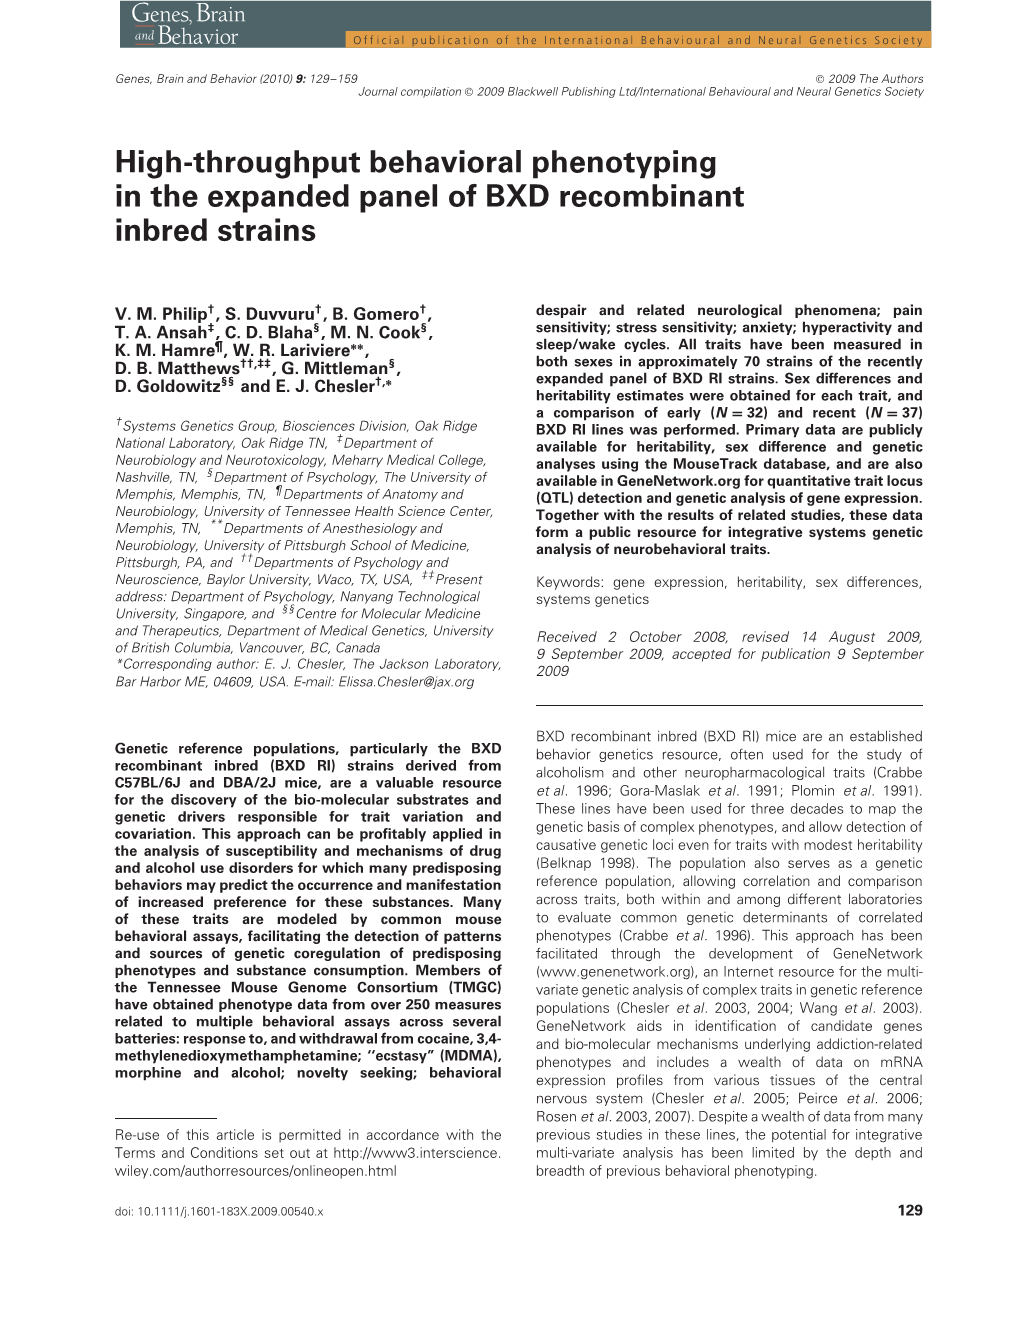 High-Throughput Behavioral Phenotyping in the Expanded Panel of BXD Recombinant Inbred Strains